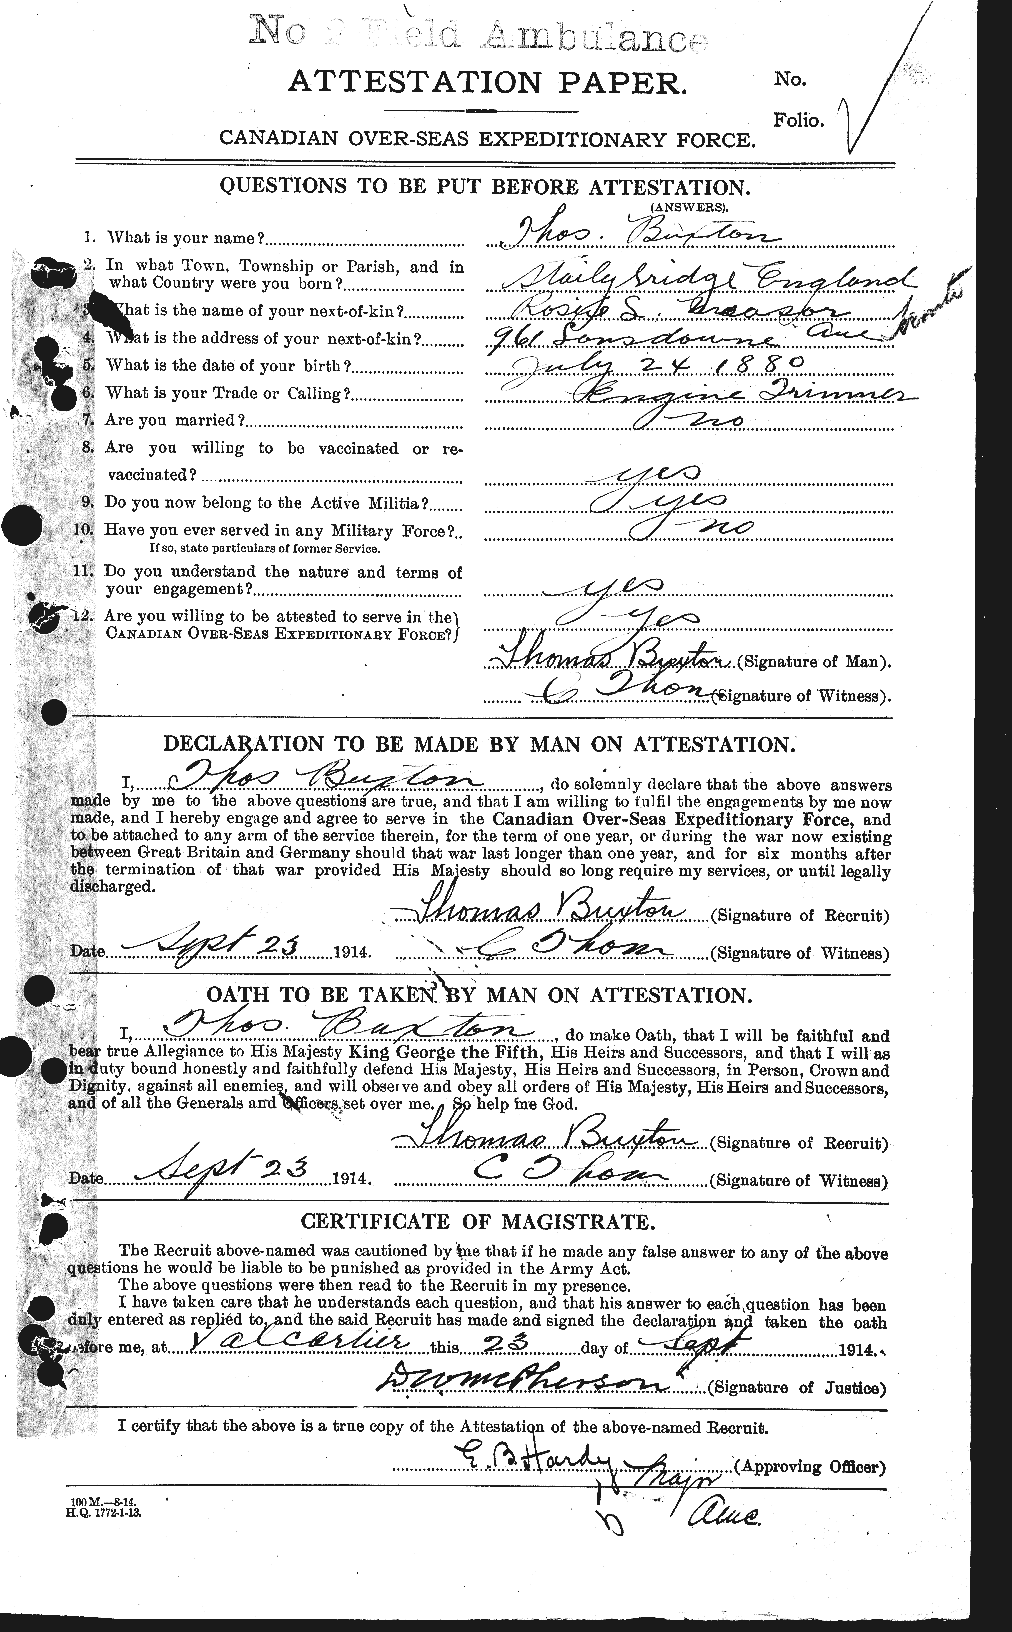 Personnel Records of the First World War - CEF 275591a